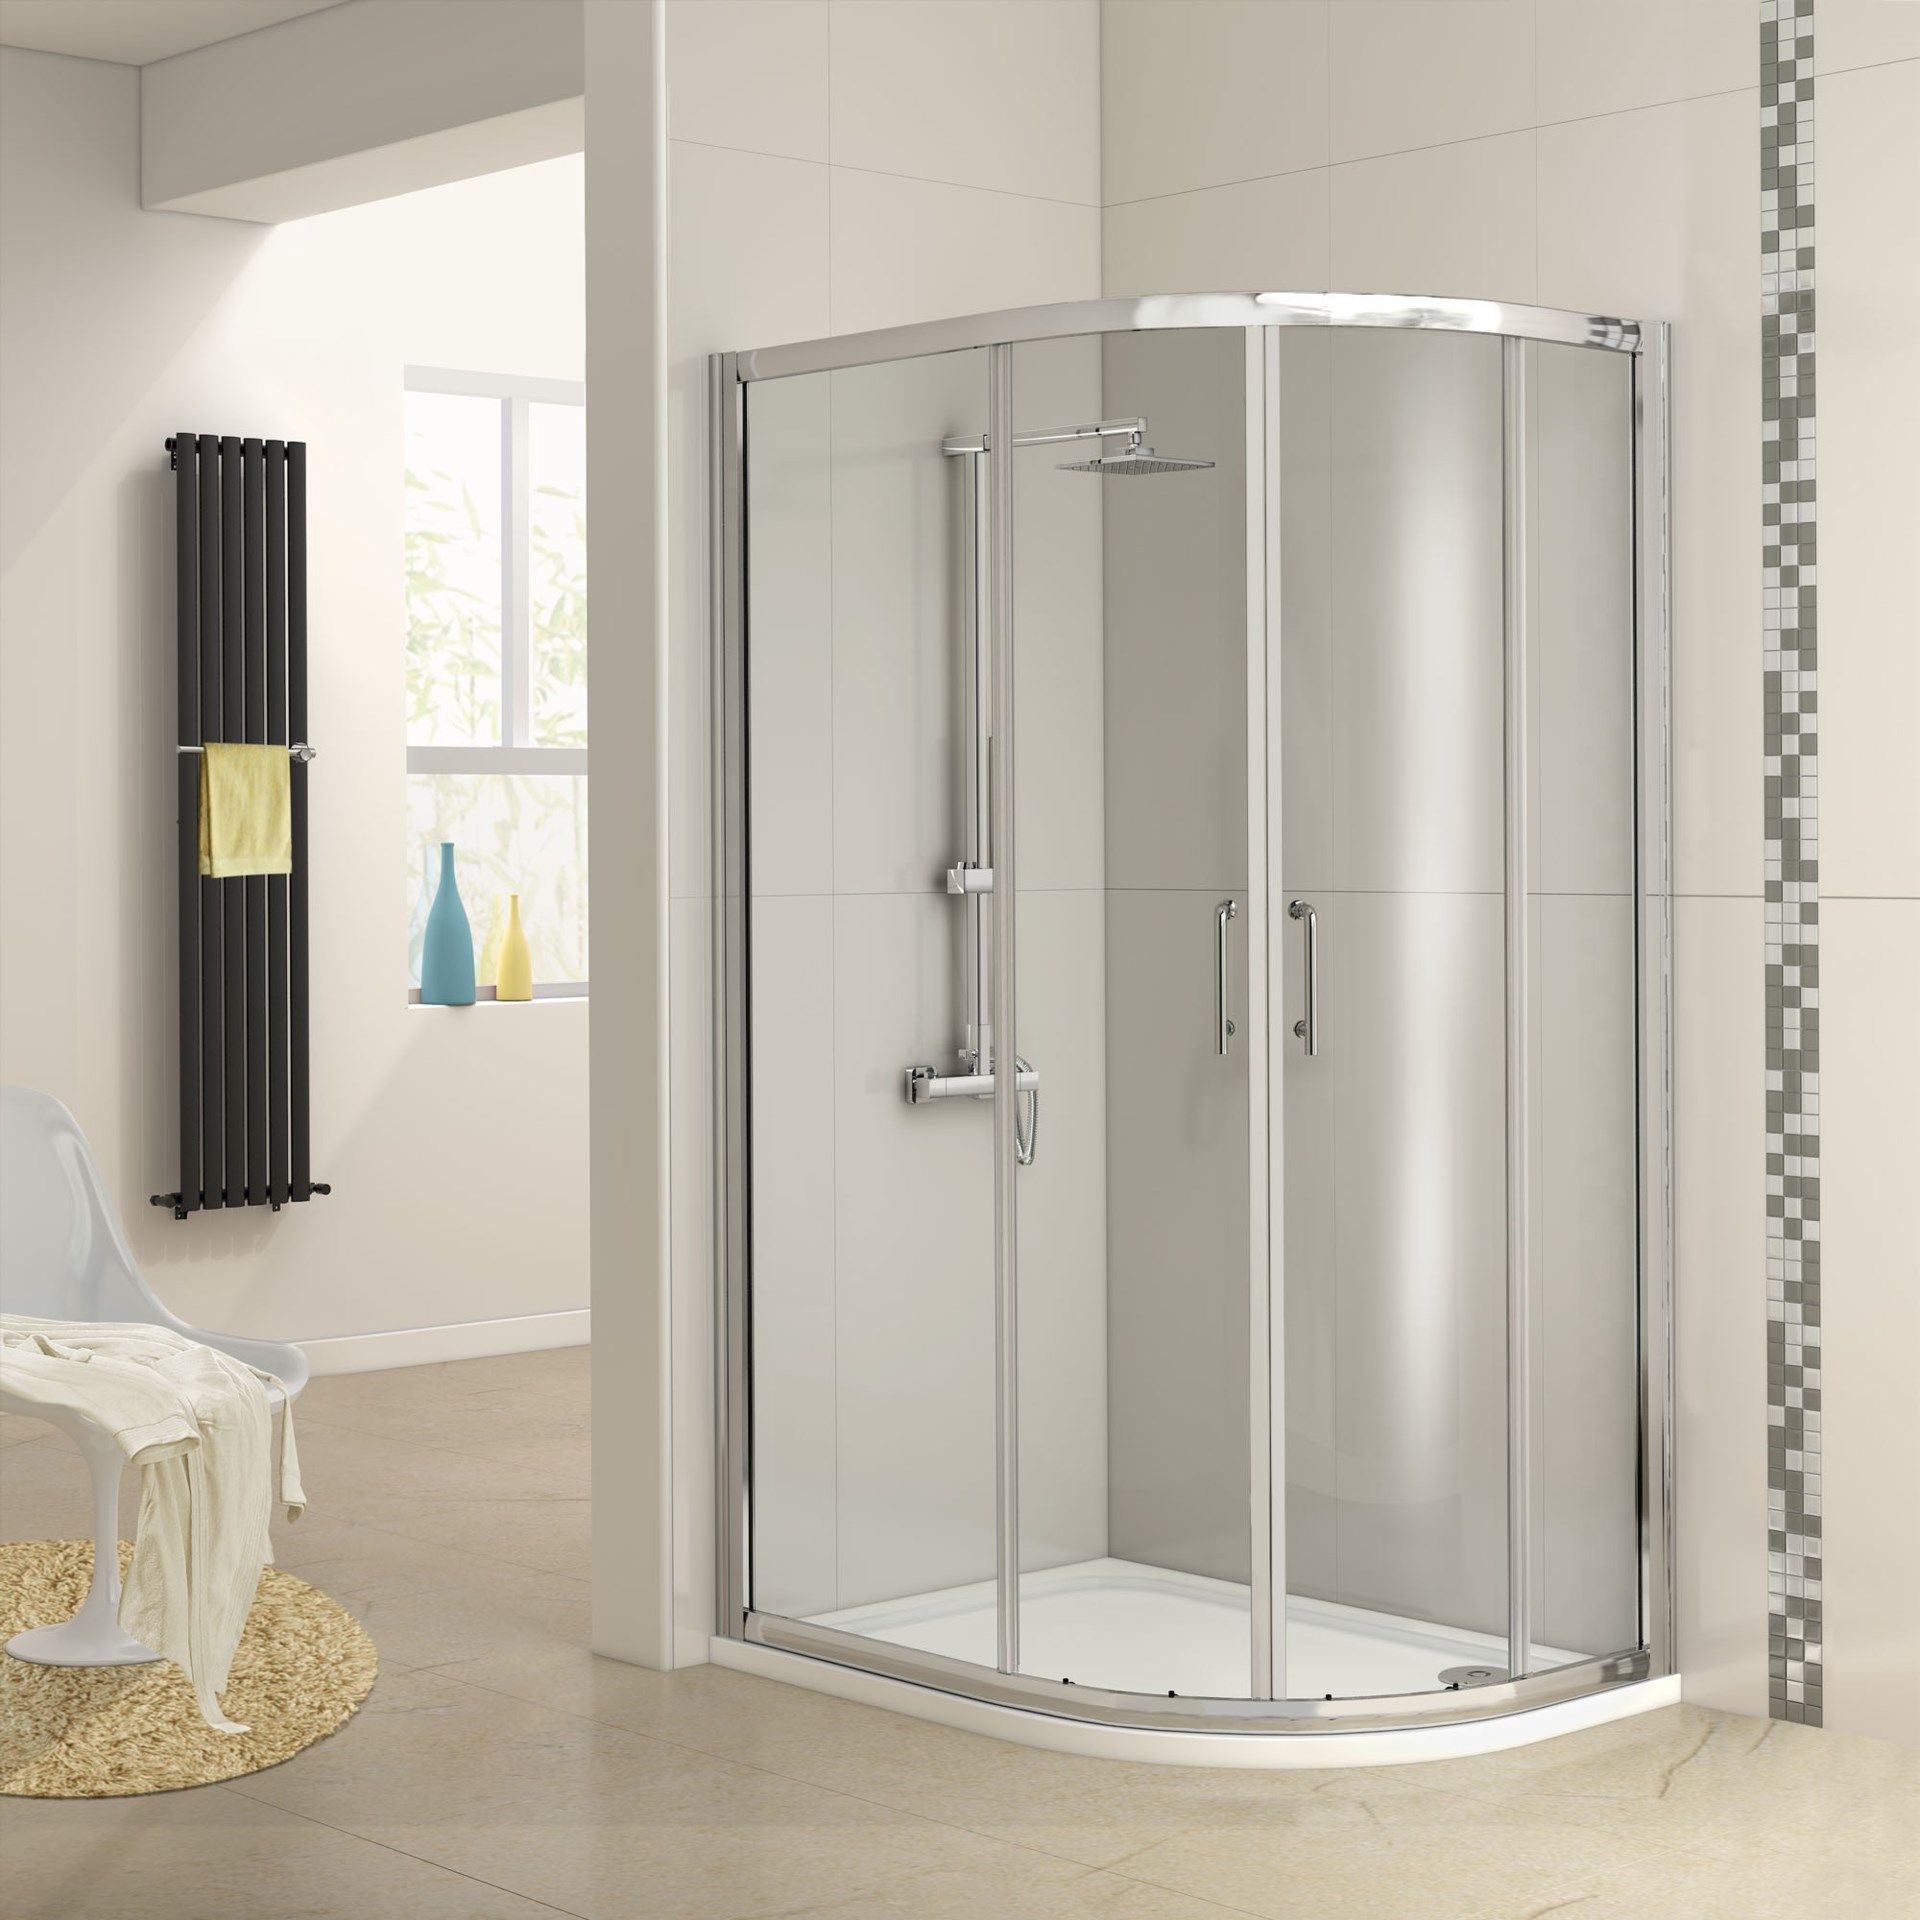 Brand New Twyfords 1200x800mm - 6mm - Offset Quadrant Shower Enclosure.RRP £599.99.Make the most of - Image 3 of 3